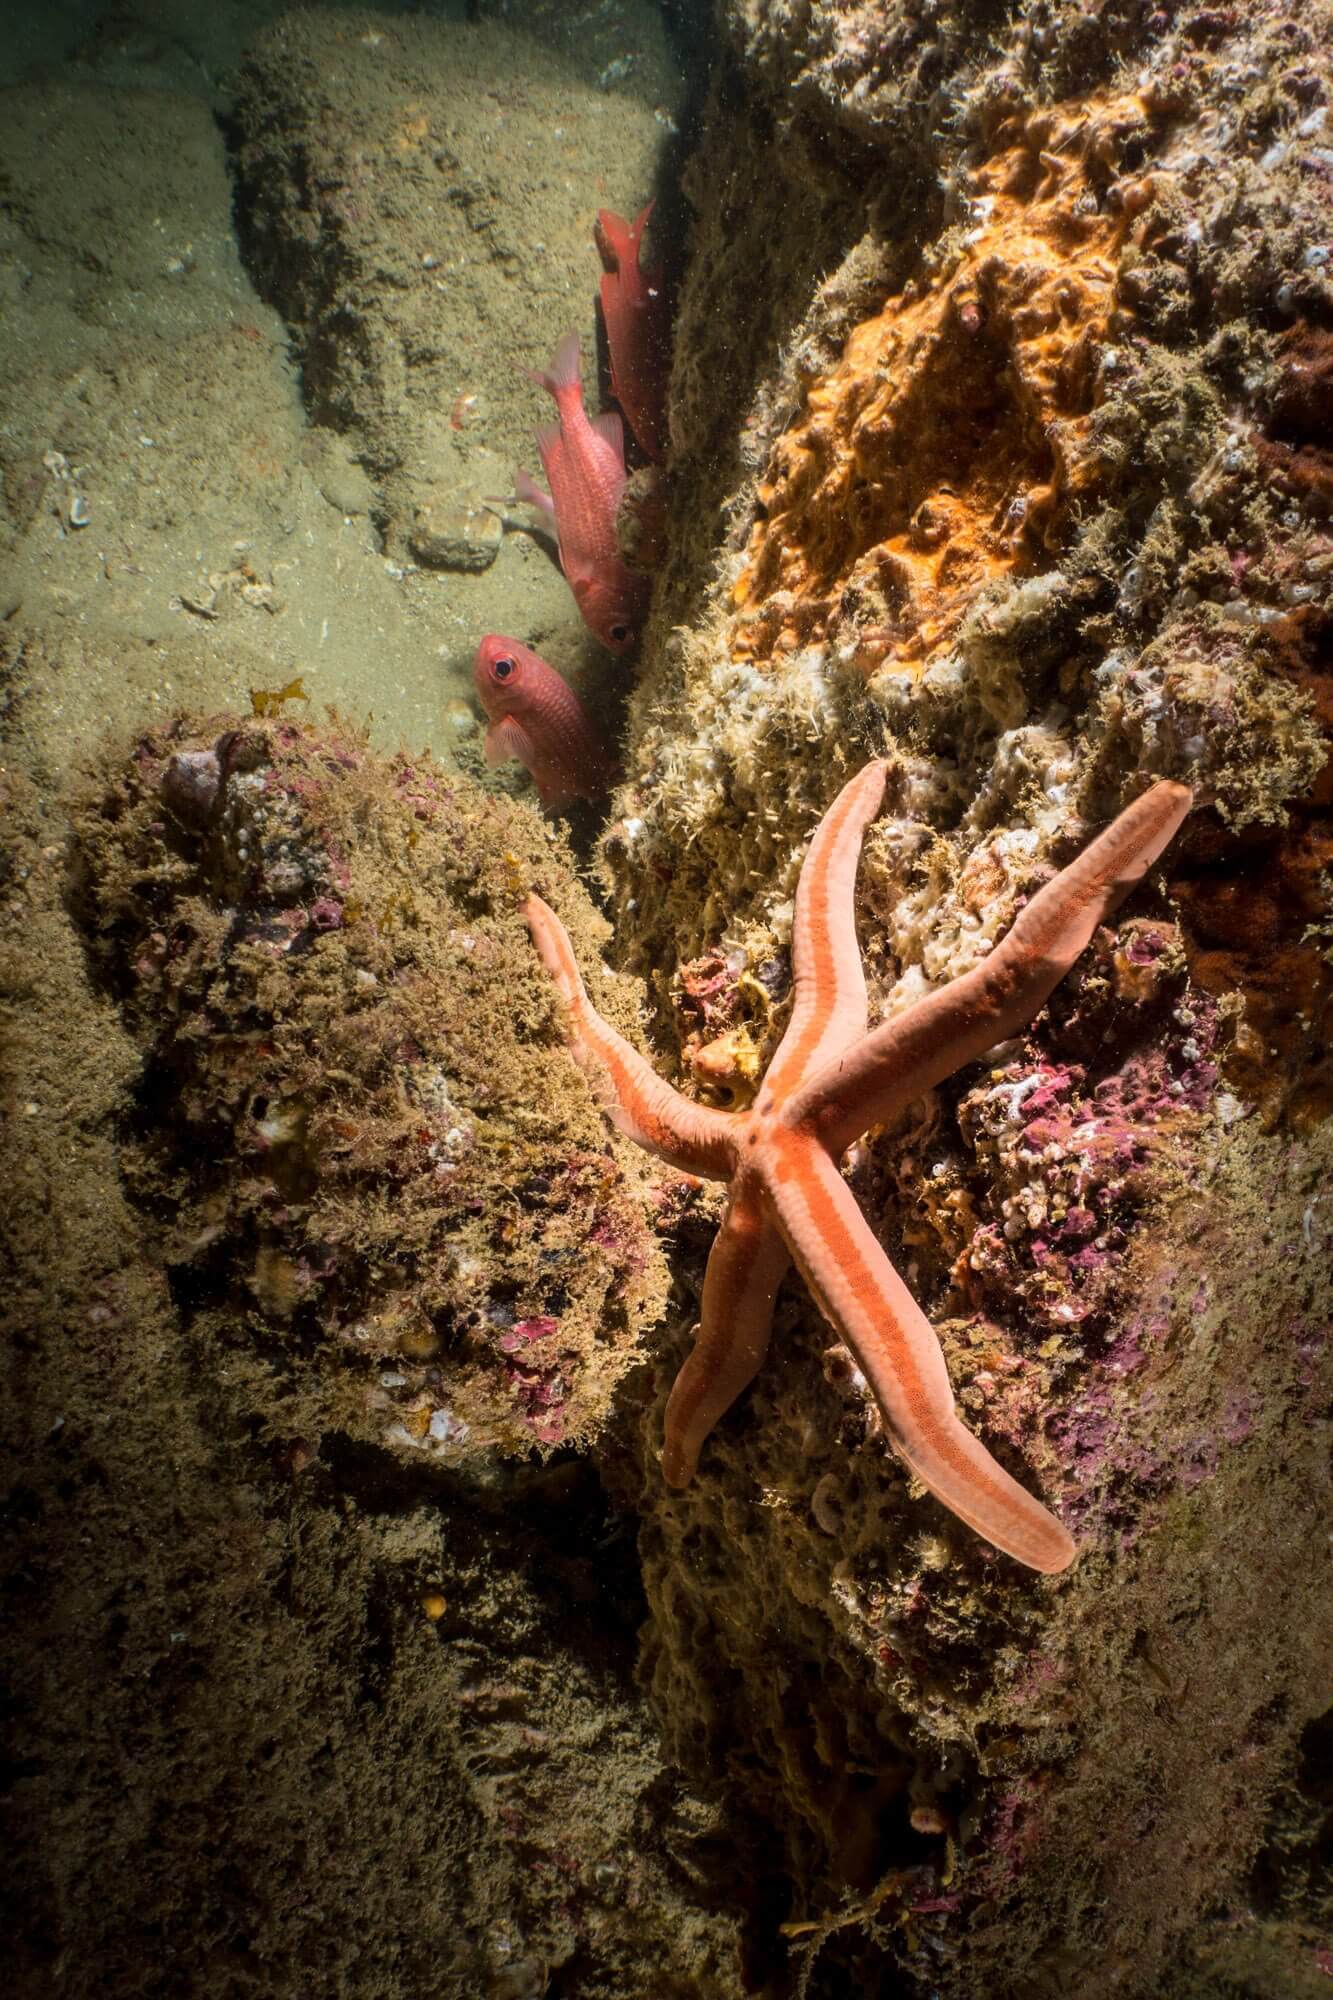 A sea star underwater at the Pelican Rock dive site in Cabo San Lucas